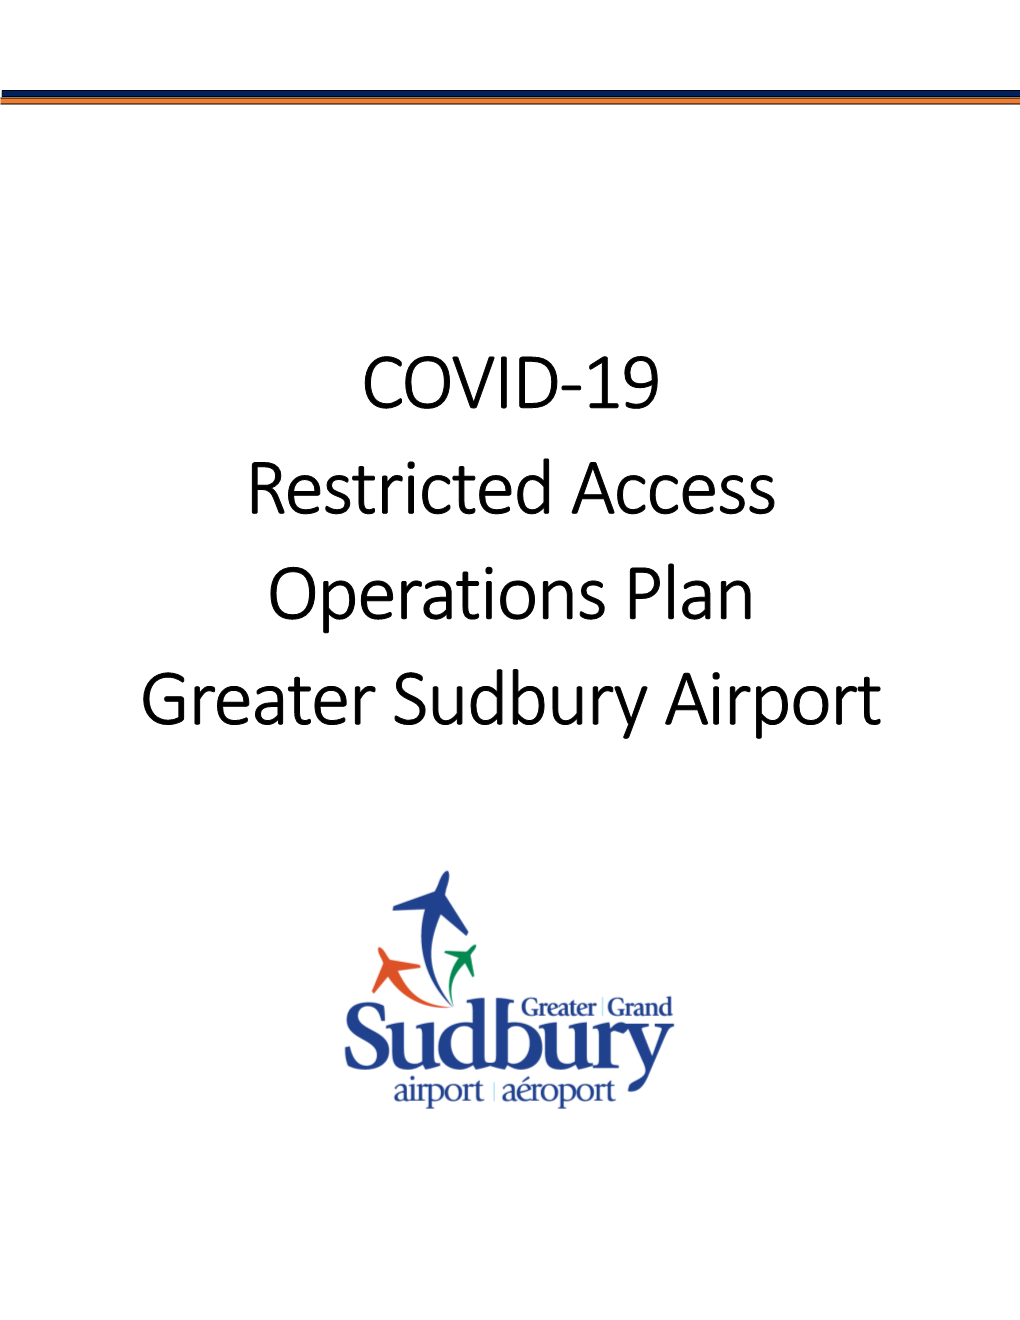 COVID-19 Restricted Access Operations Plan Greater Sudbury Airport